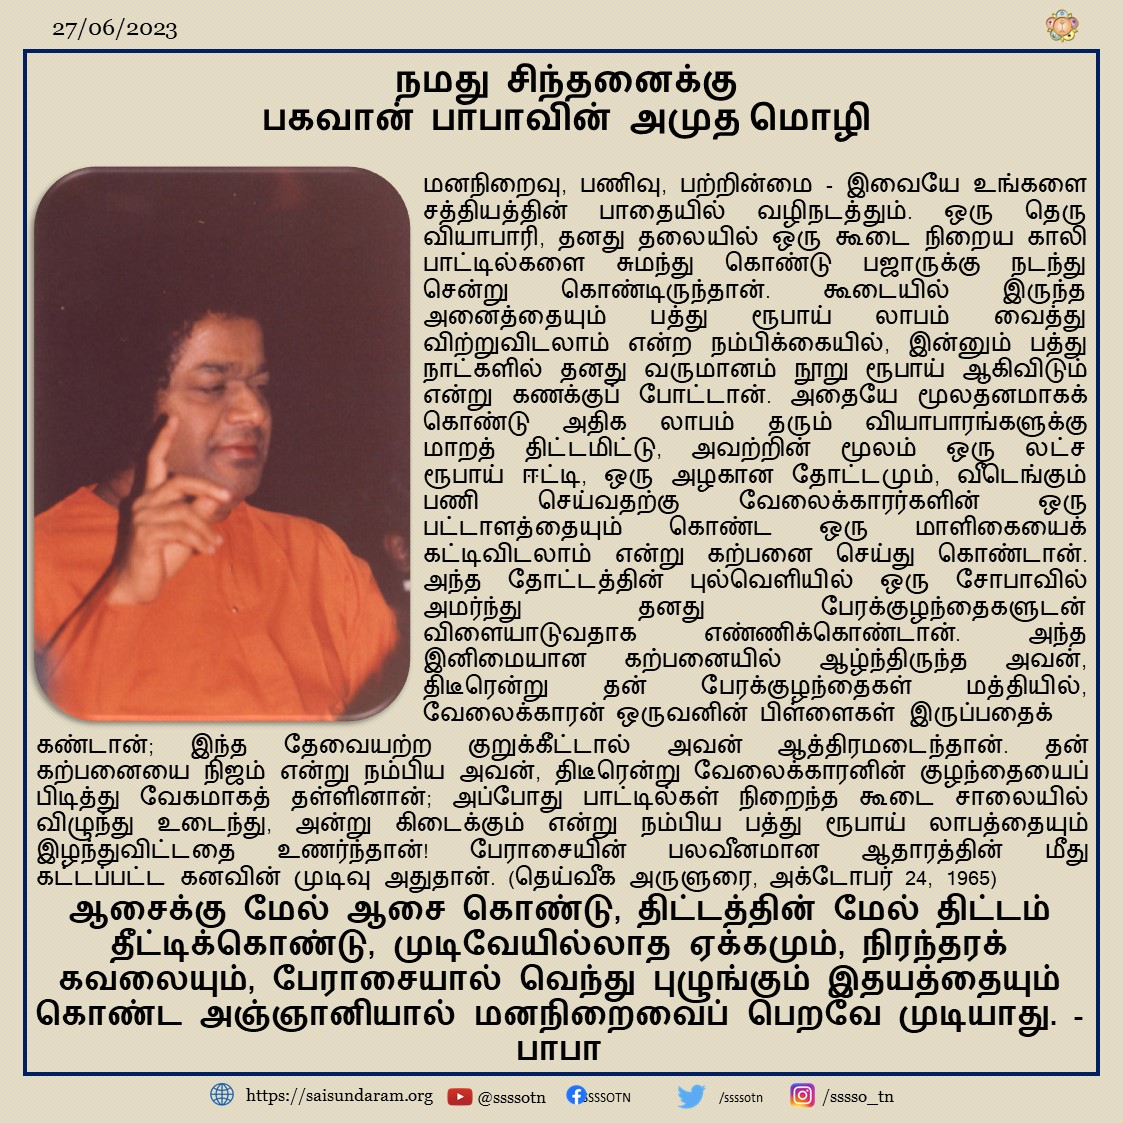 Thought For the Day | 27th June 2023  Our Most Beloved Bhagawan's Divine Message As Written in Prashanthi Nilayam, Puttaparthi. Divine Discourse - October 24, 1965  #SriSathyaSai #SriSathyaSaibaba #SriSathyaSai #ThoughtforTheDay #Divinemessage